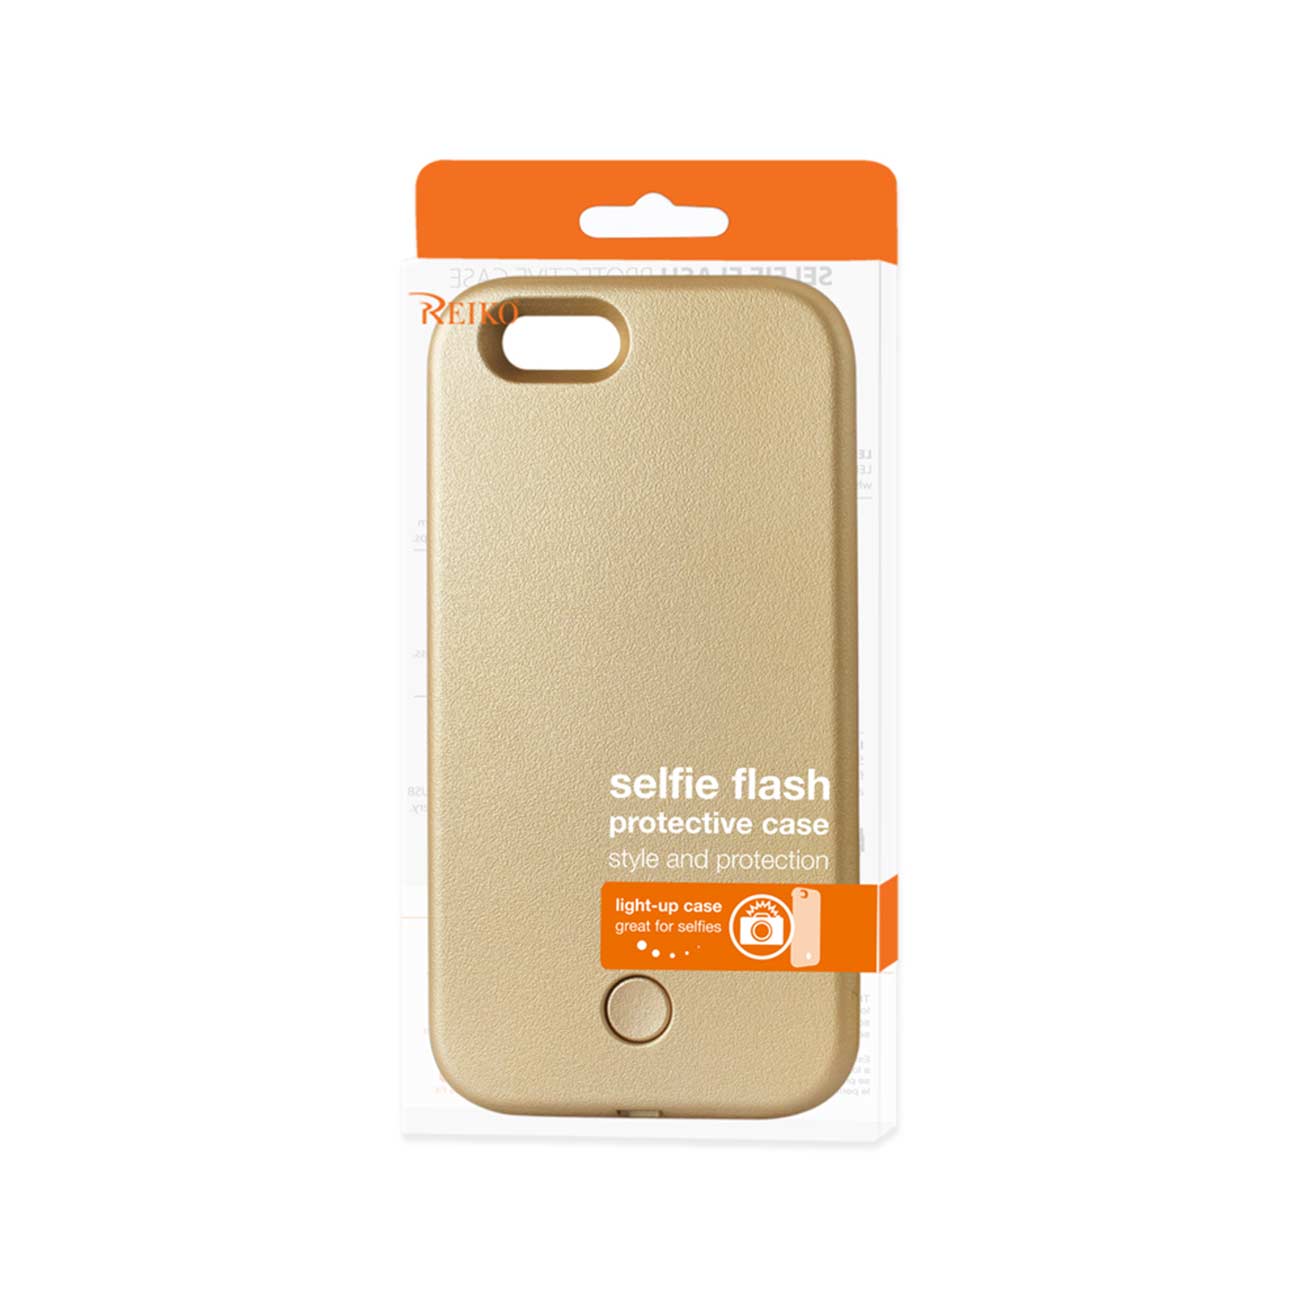 Case Illuminated LED Selfie Light Up iPhone 6/ 6S Gold Color